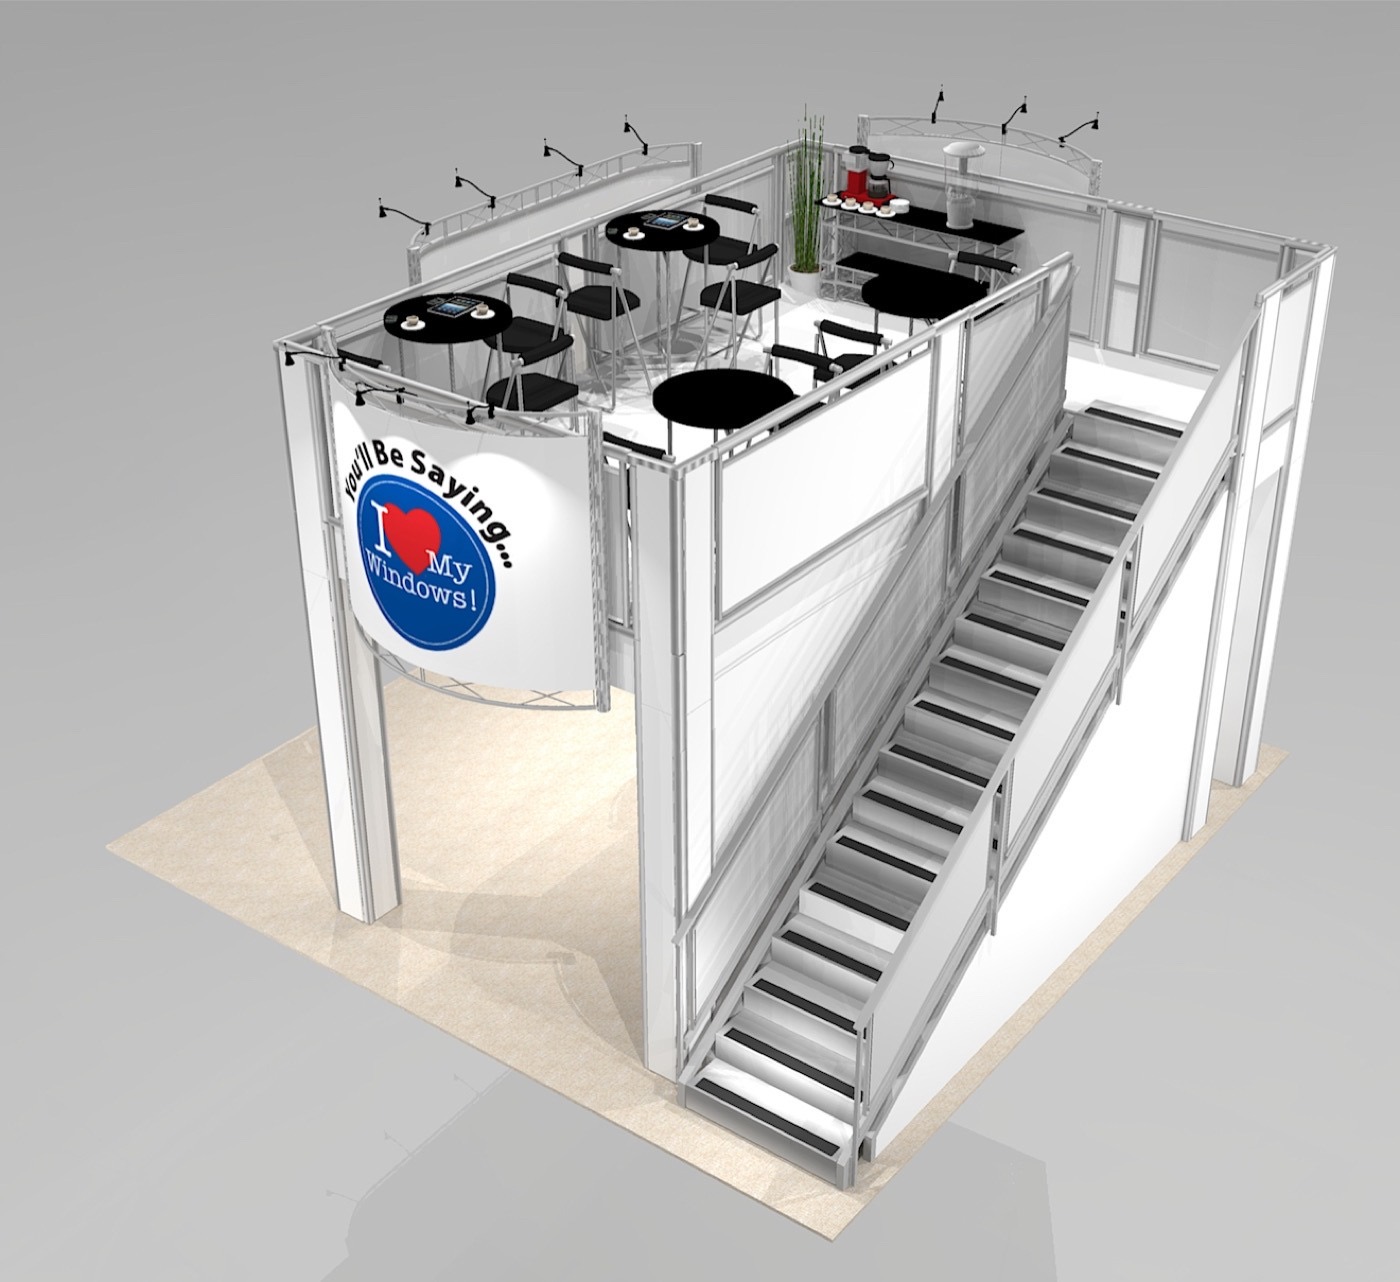 Double deck trade show exhibit structure with stairs located in the back for turnkey rental in Las Vegas